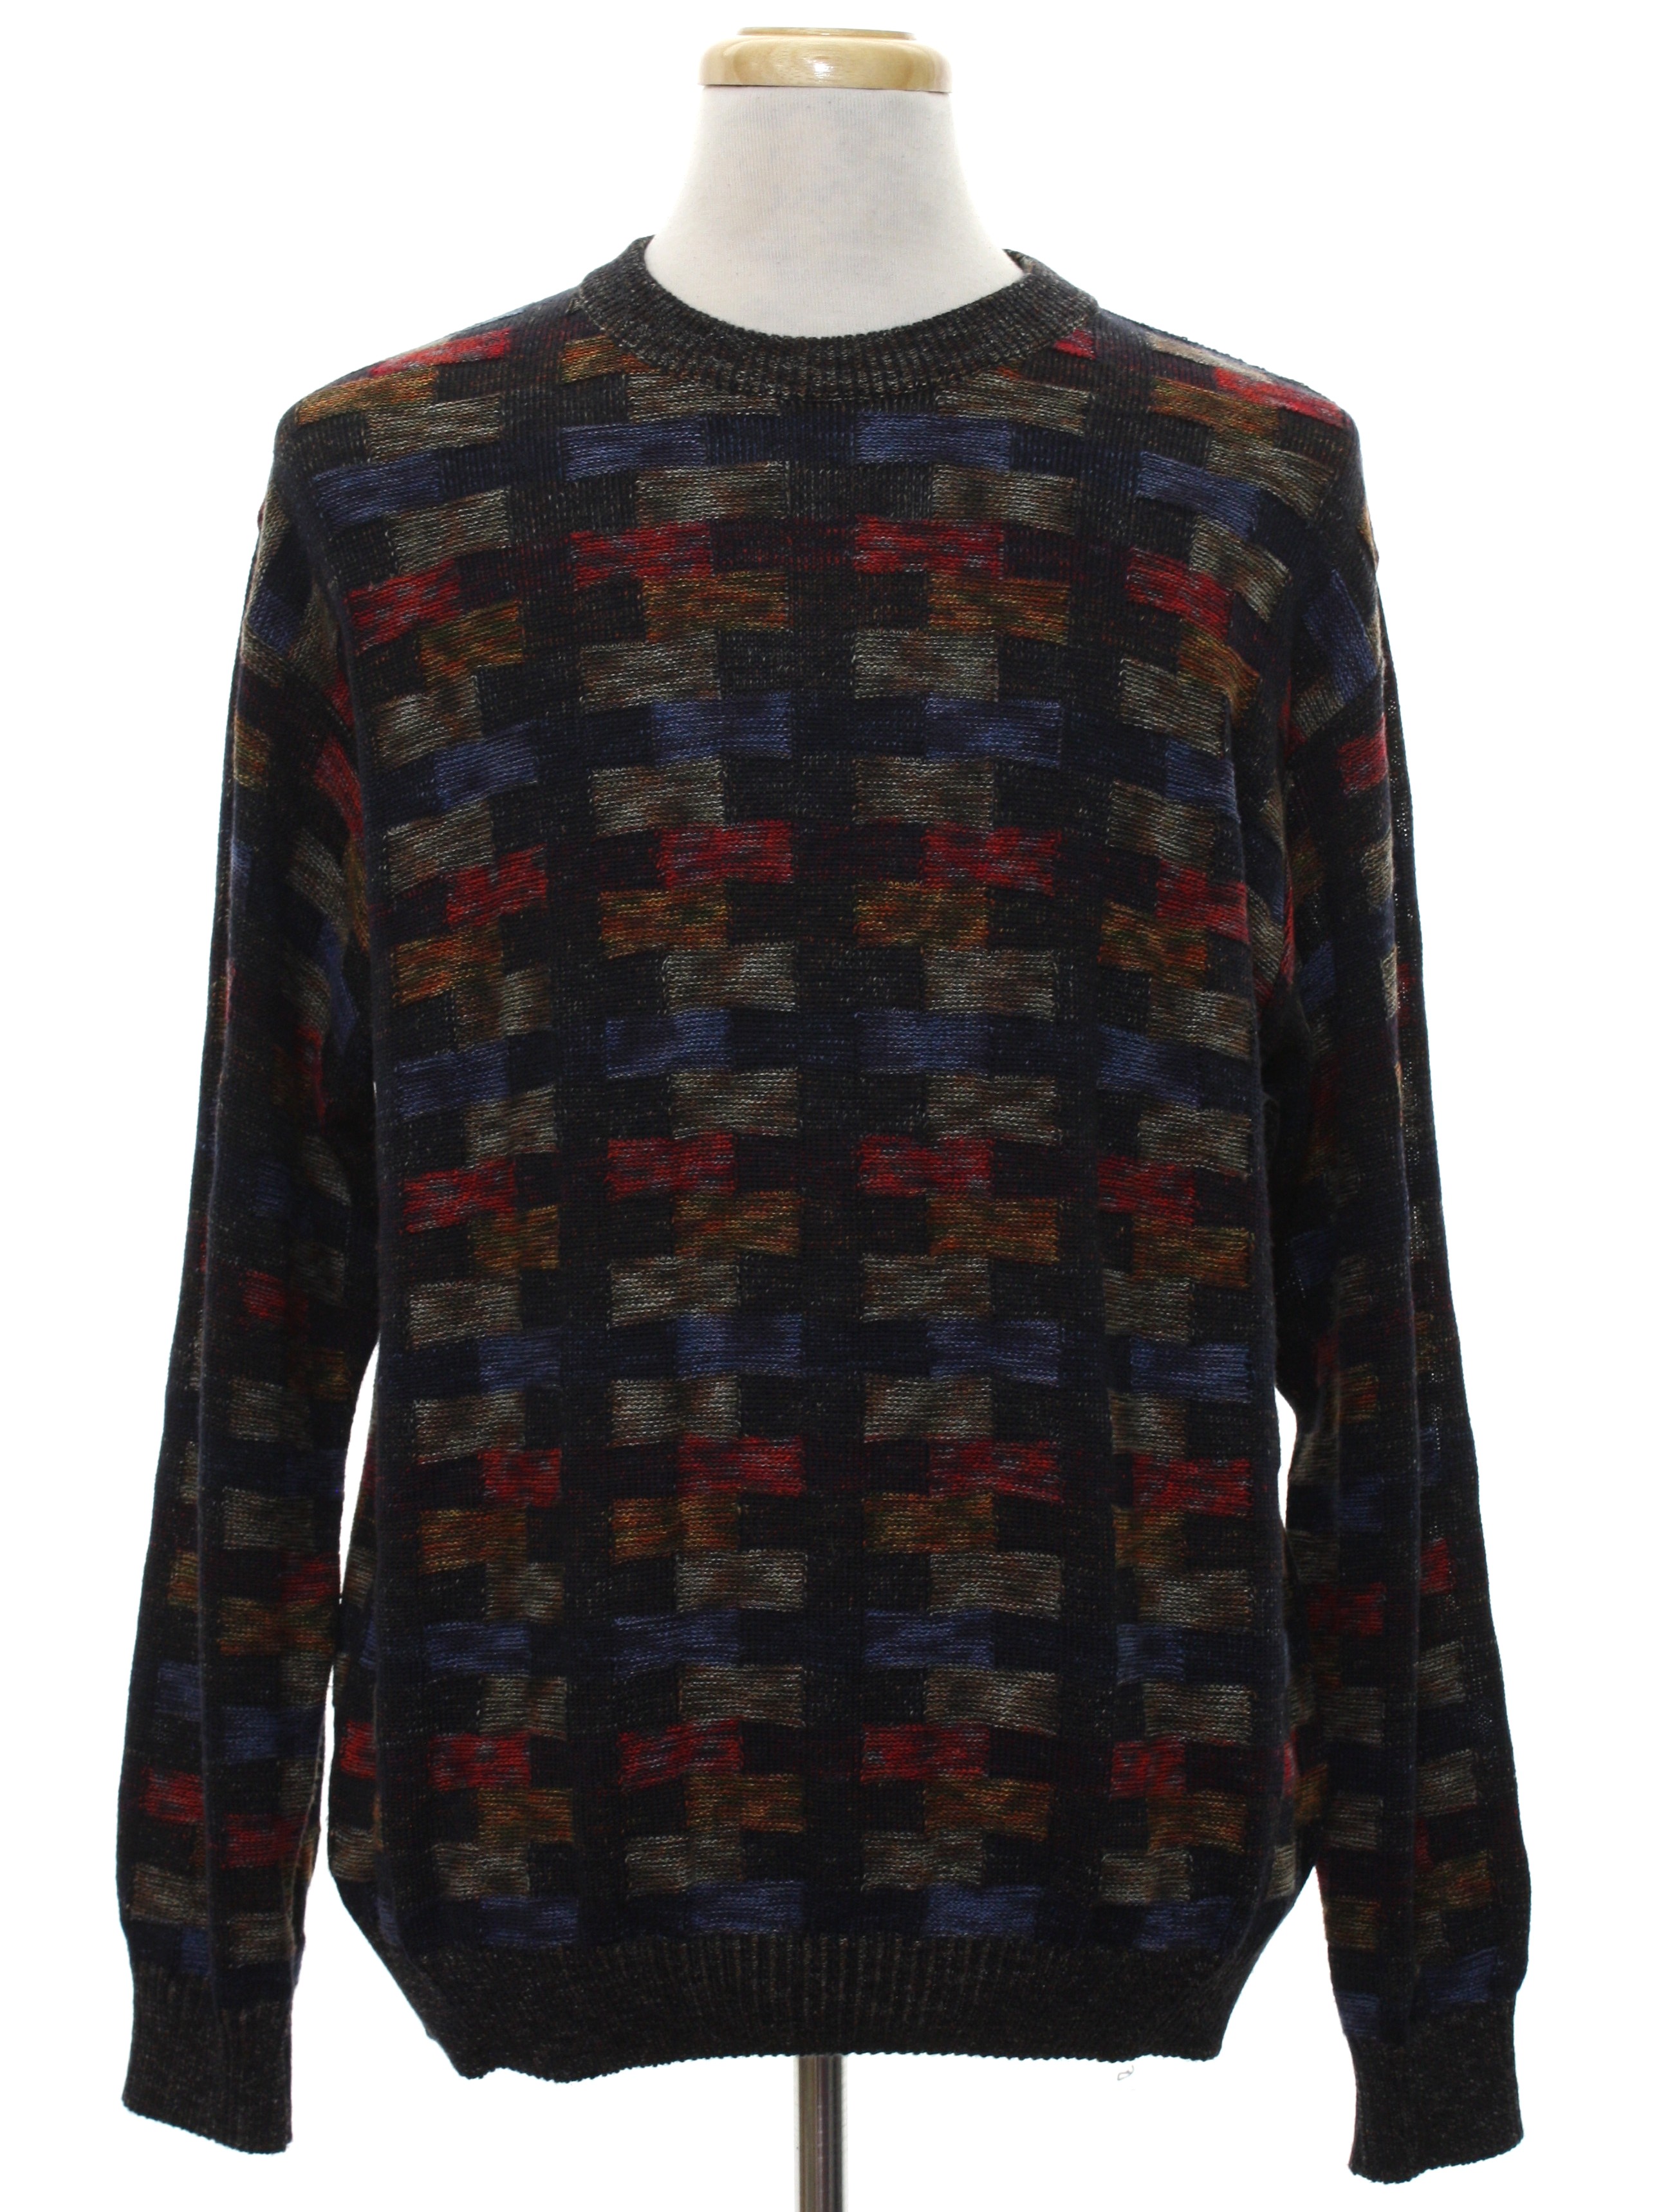 Retro 80's Sweater: 80s style (made in 90s) -Norm Thompson- Mens black ...